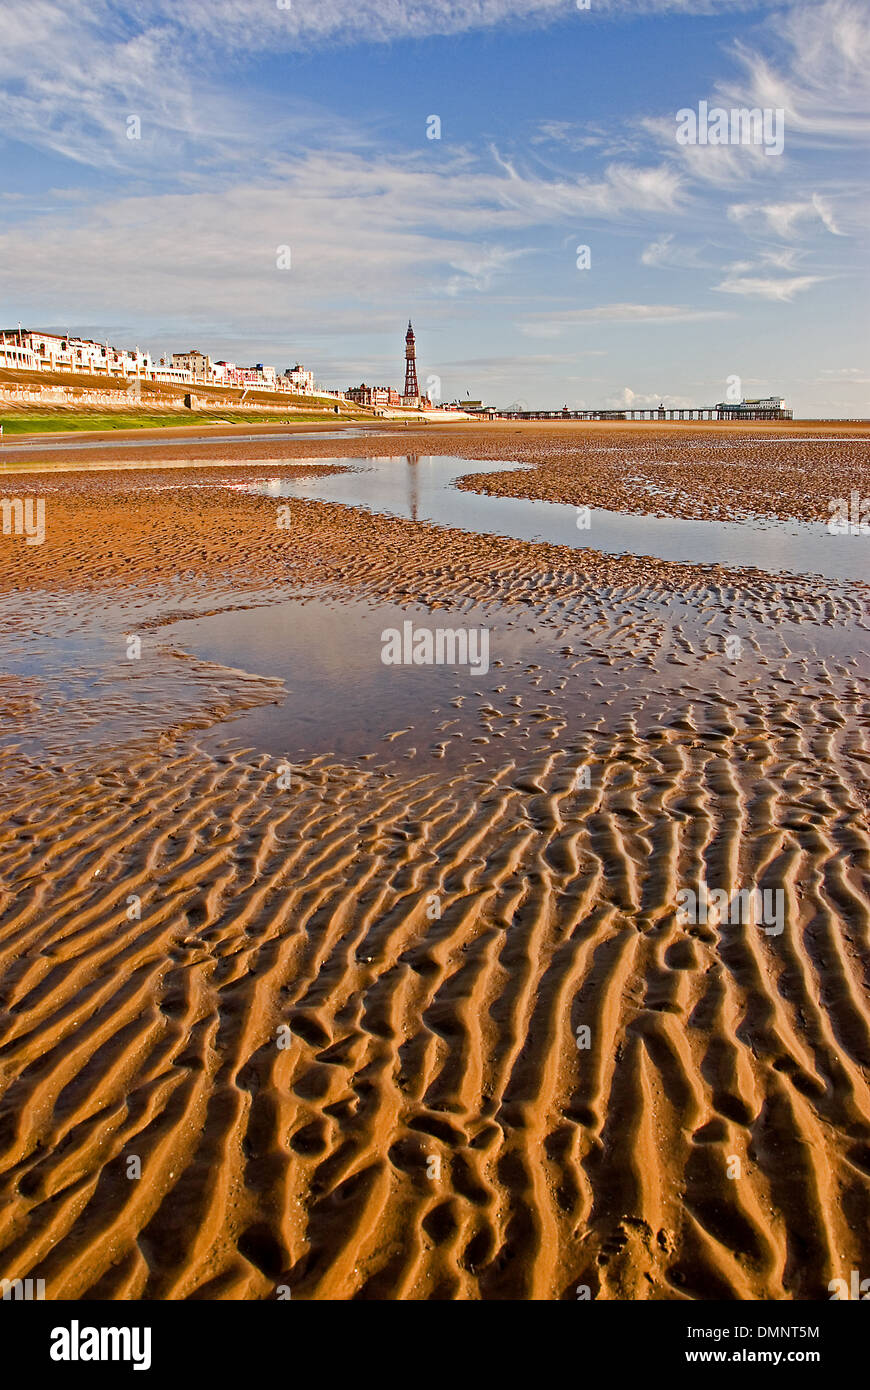 Low tide in the Irish Sea exposes vast areas of rippling sandy beaches along Blackpool's seafront. Stock Photo